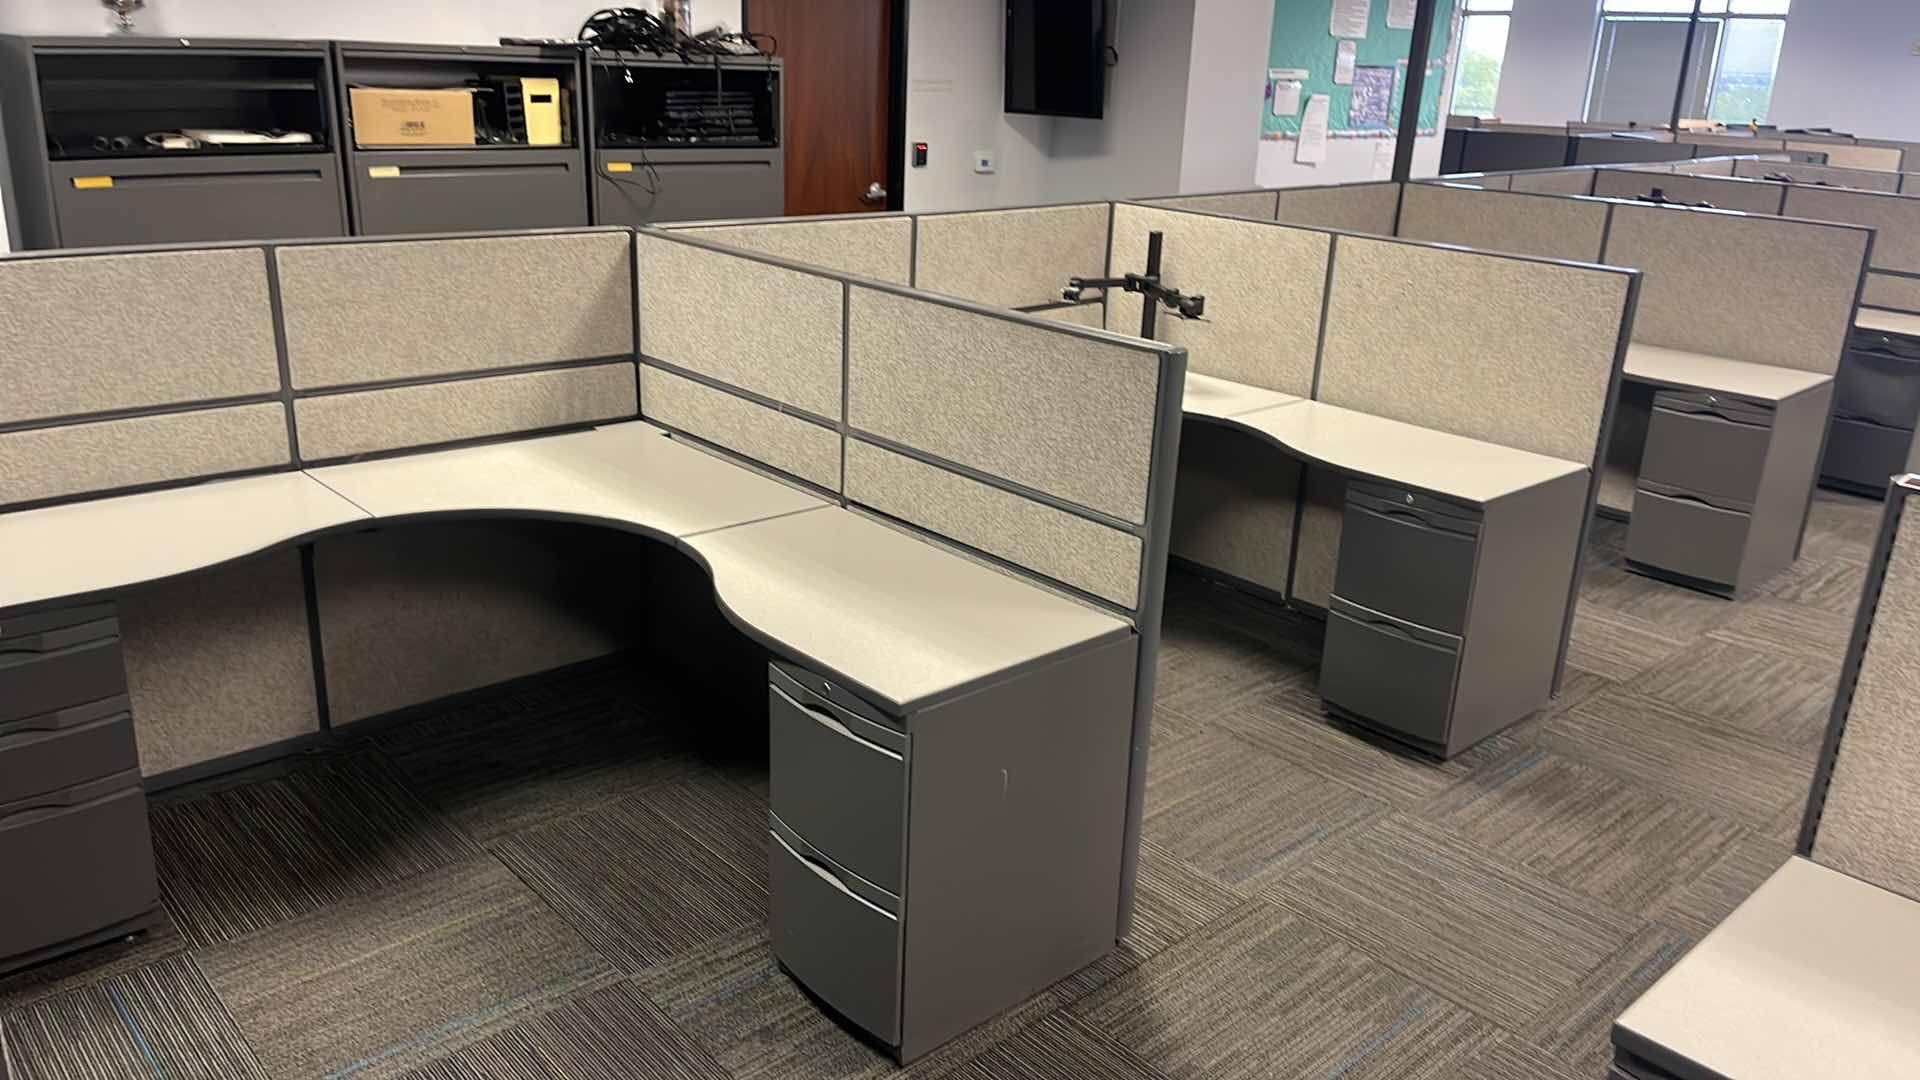 Photo 1 of 3 PC CUBICAL SET W 5 DRAWER MEDAL BASE DESKS 76” X 76” H50” (BUYER TO DISASSEMBLE & REMOVE FROM 2ND STORY OFFICE BUILDING W ELEVATOR)